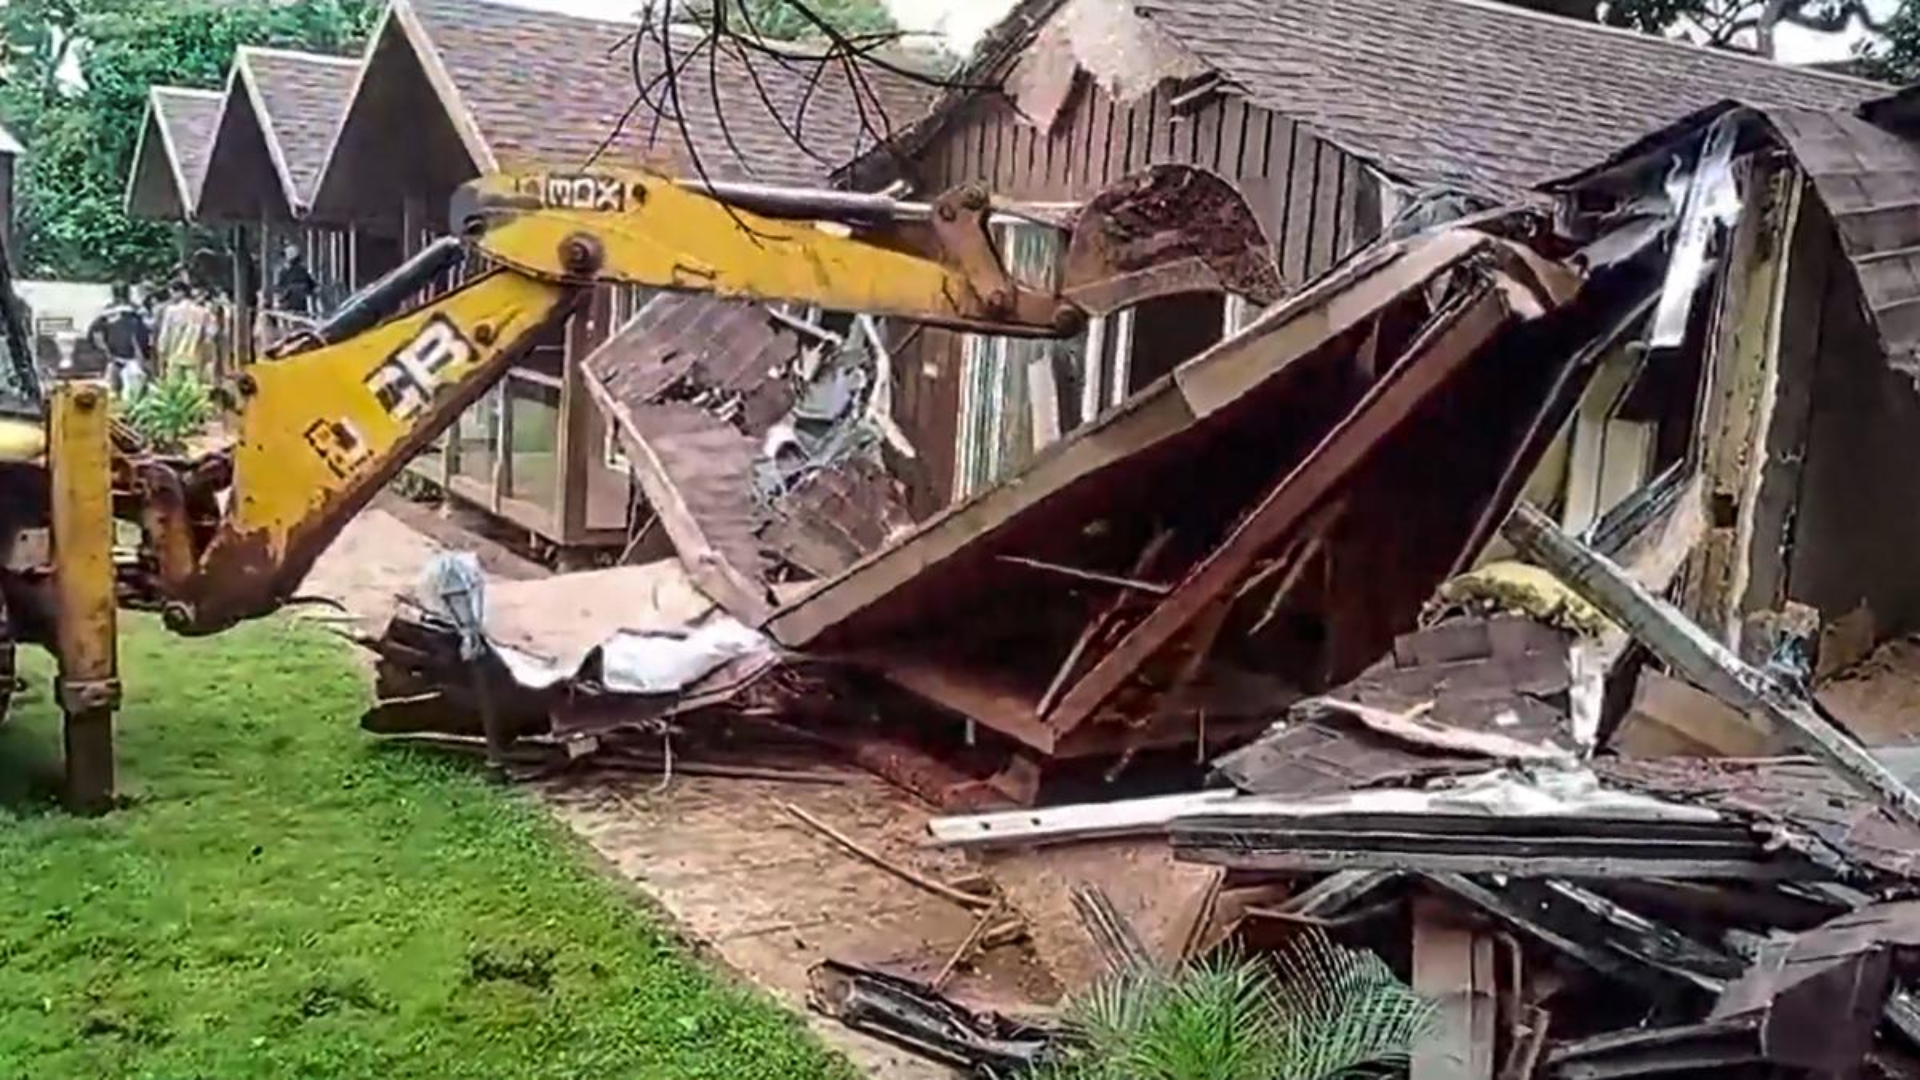 Pune Porsche Crash: Illegal Portions Of Resort Owned By Minor's Family Demolished In Mahabaleshwar